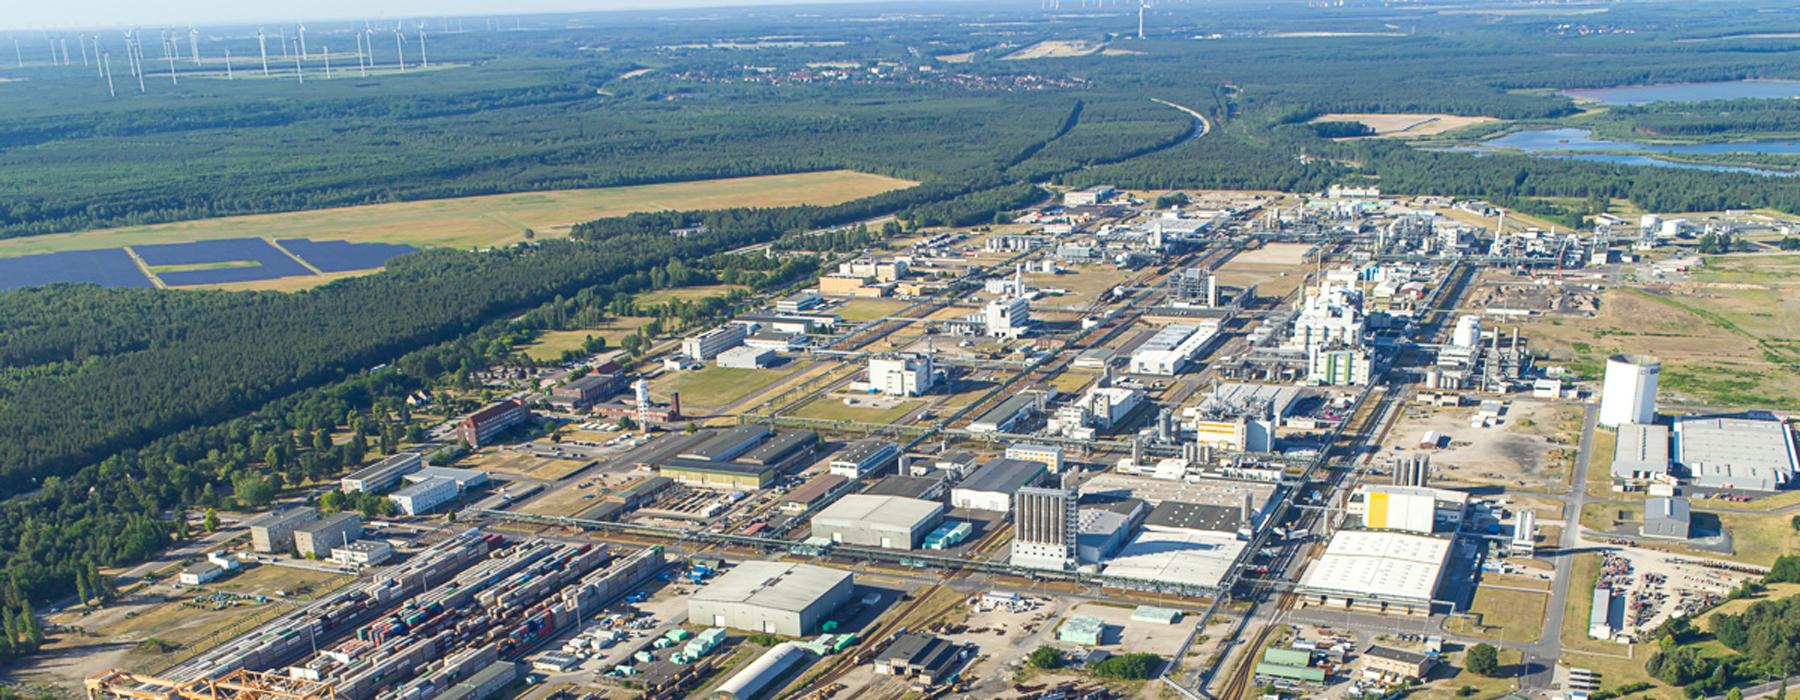 Aerial view of BASF